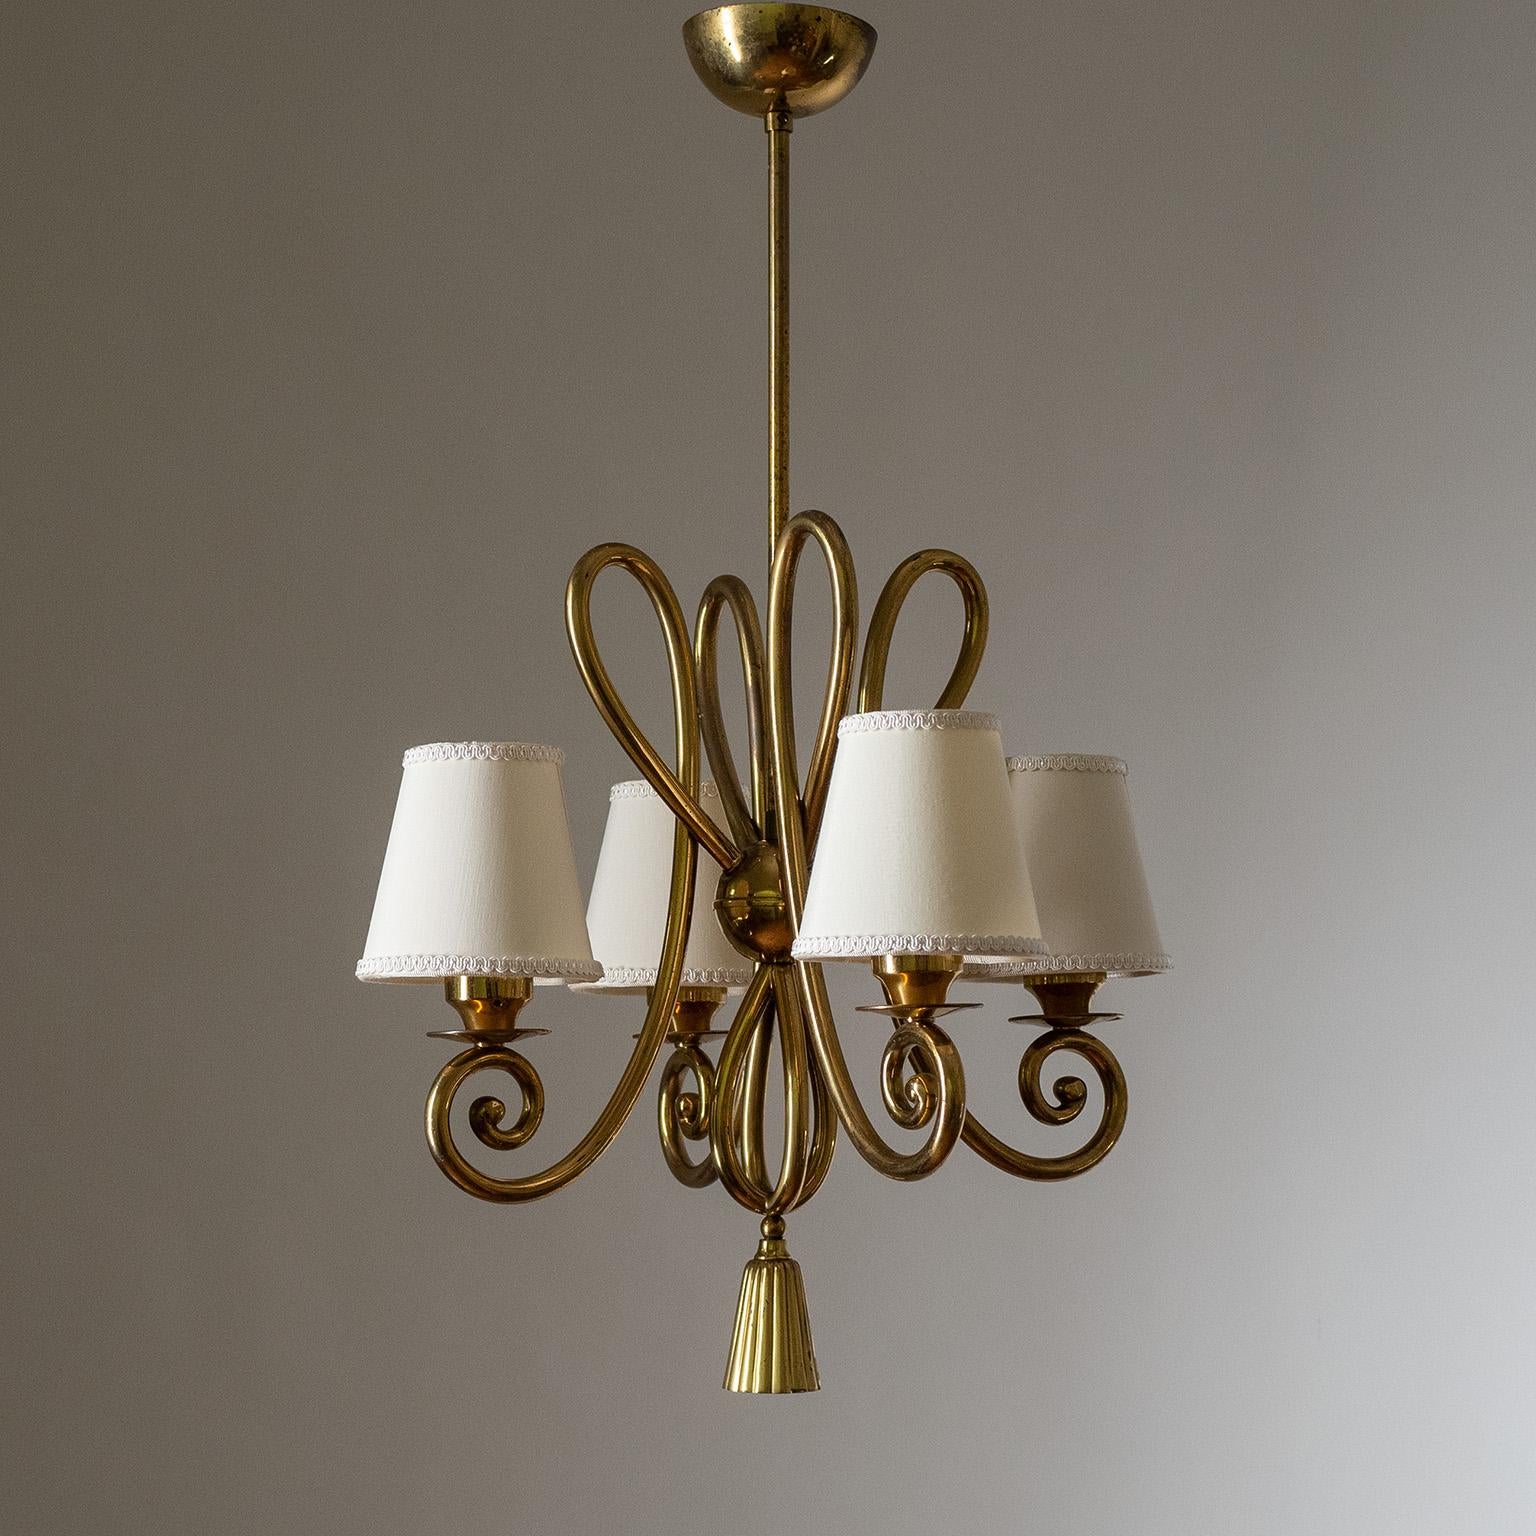 Charming Italian brass chandelier from the 1940-1950s. Four intricately curved brass arms, as well as a tassel-shaped brass finial. Four original brass E14 sockets with new wiring.